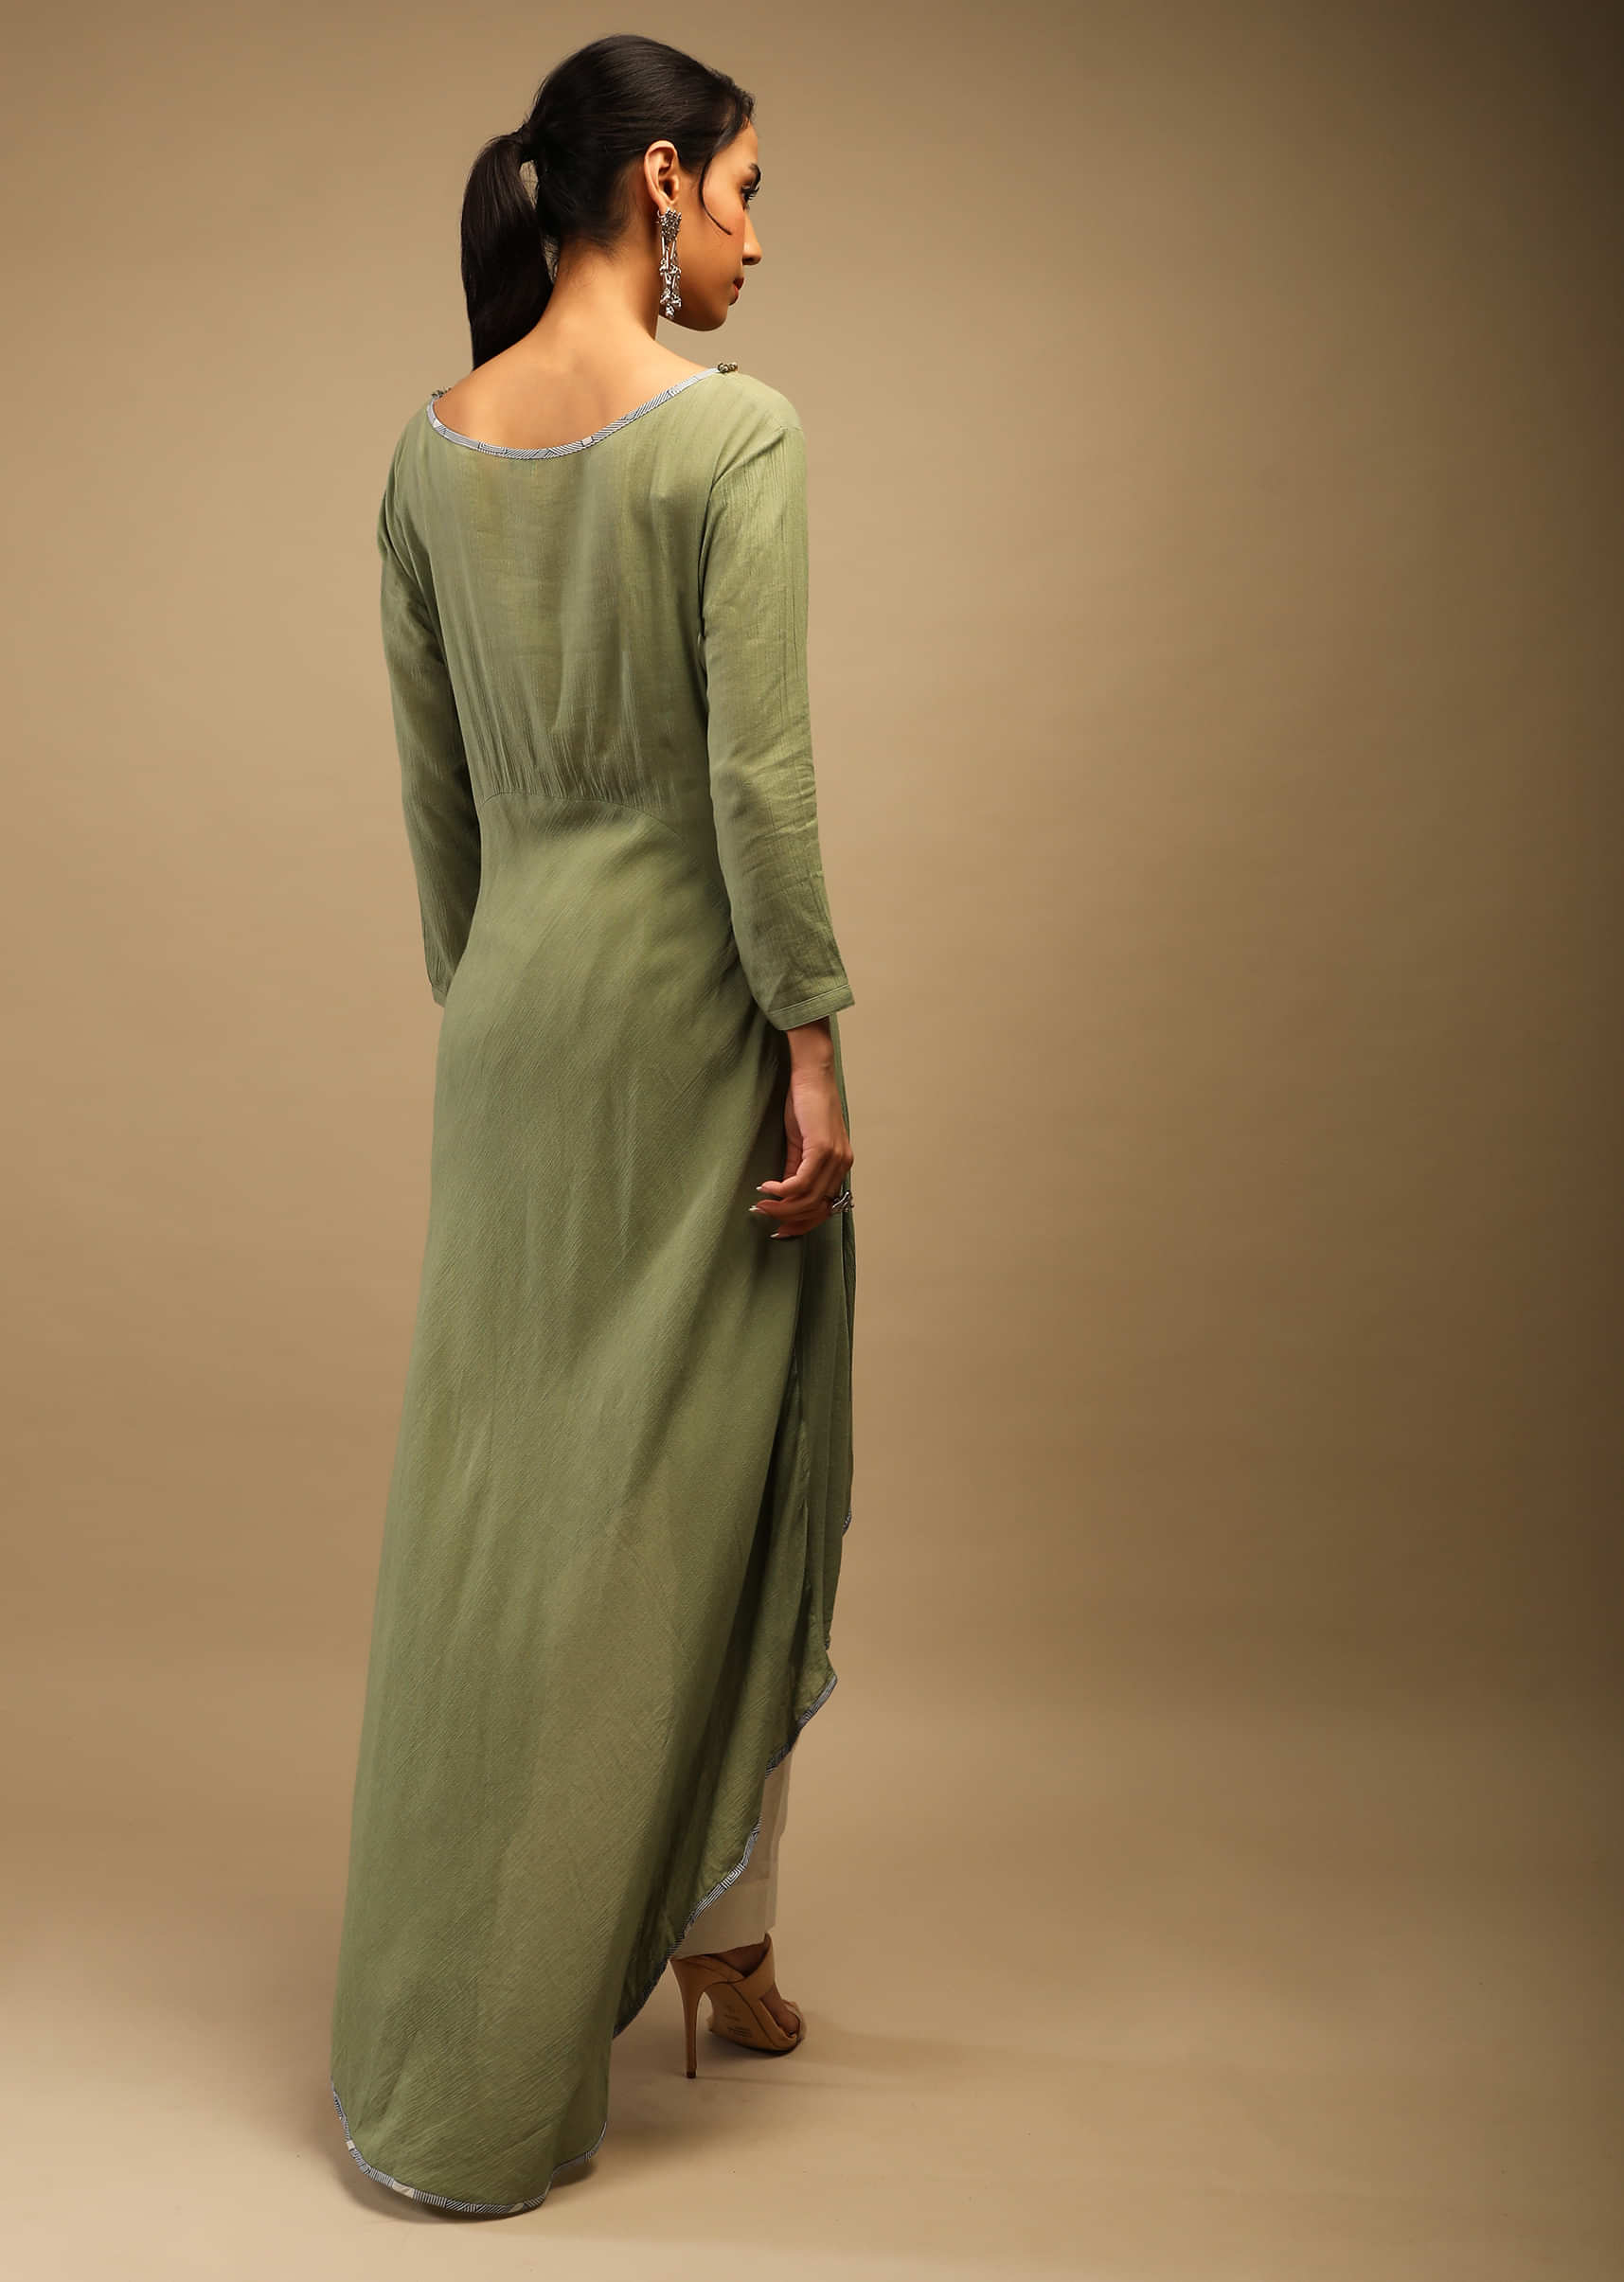 Dusty Olive Tunic In Chiffon With High Low Hemline And Sequins Work On The Neckline 